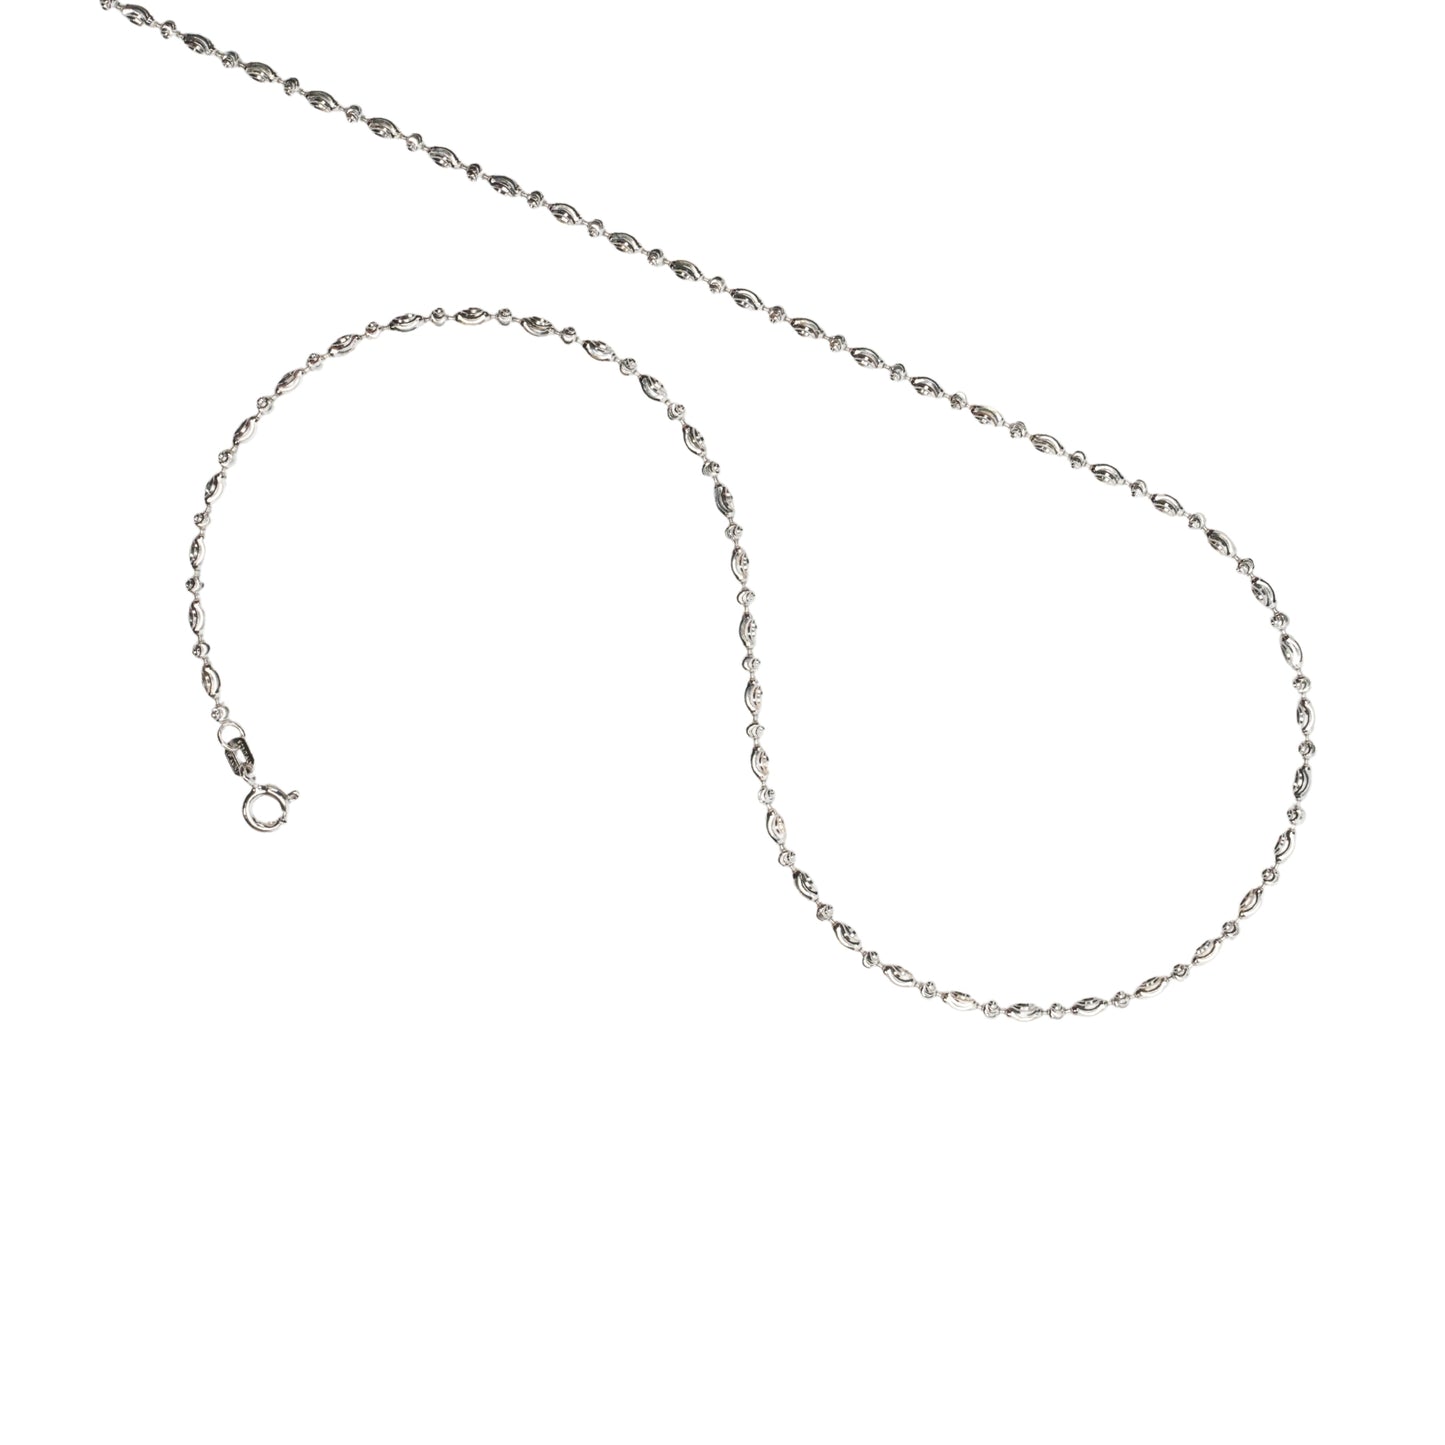 sterling silver necklace 16 inches Sparkling Rice Bead Necklace